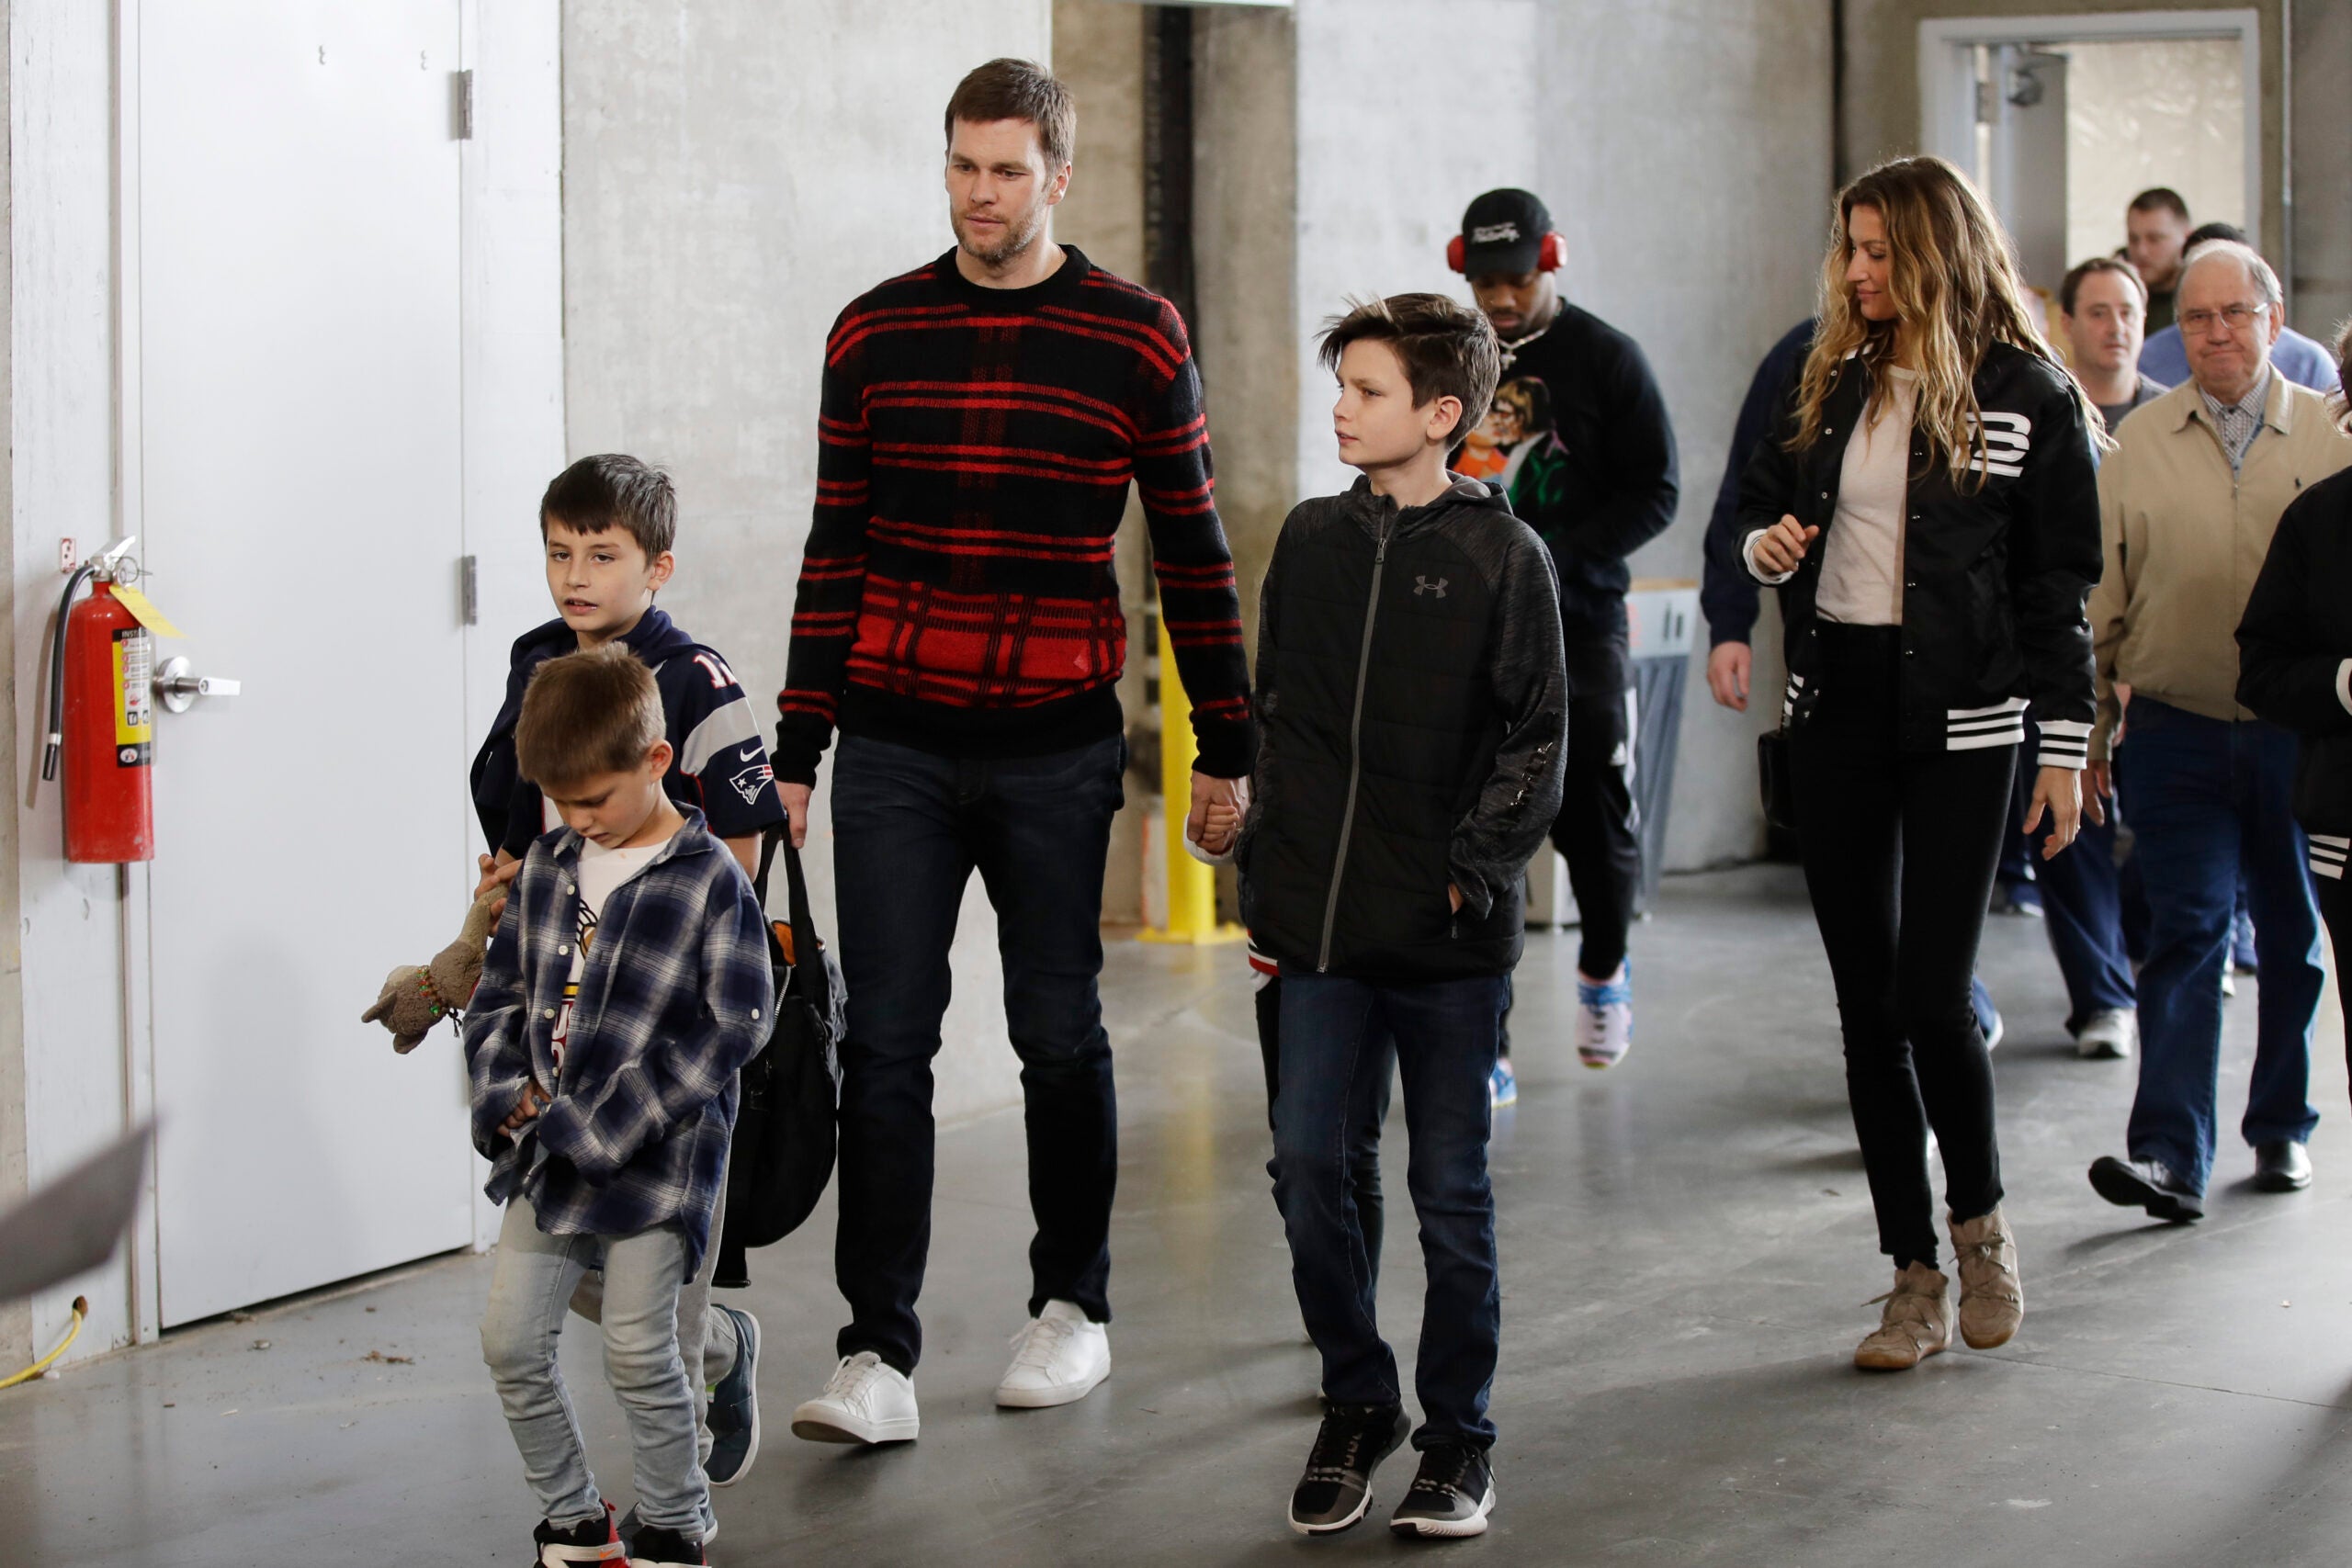 Kevin Youkilis sneaks in Tom Brady family photo - Sports Illustrated